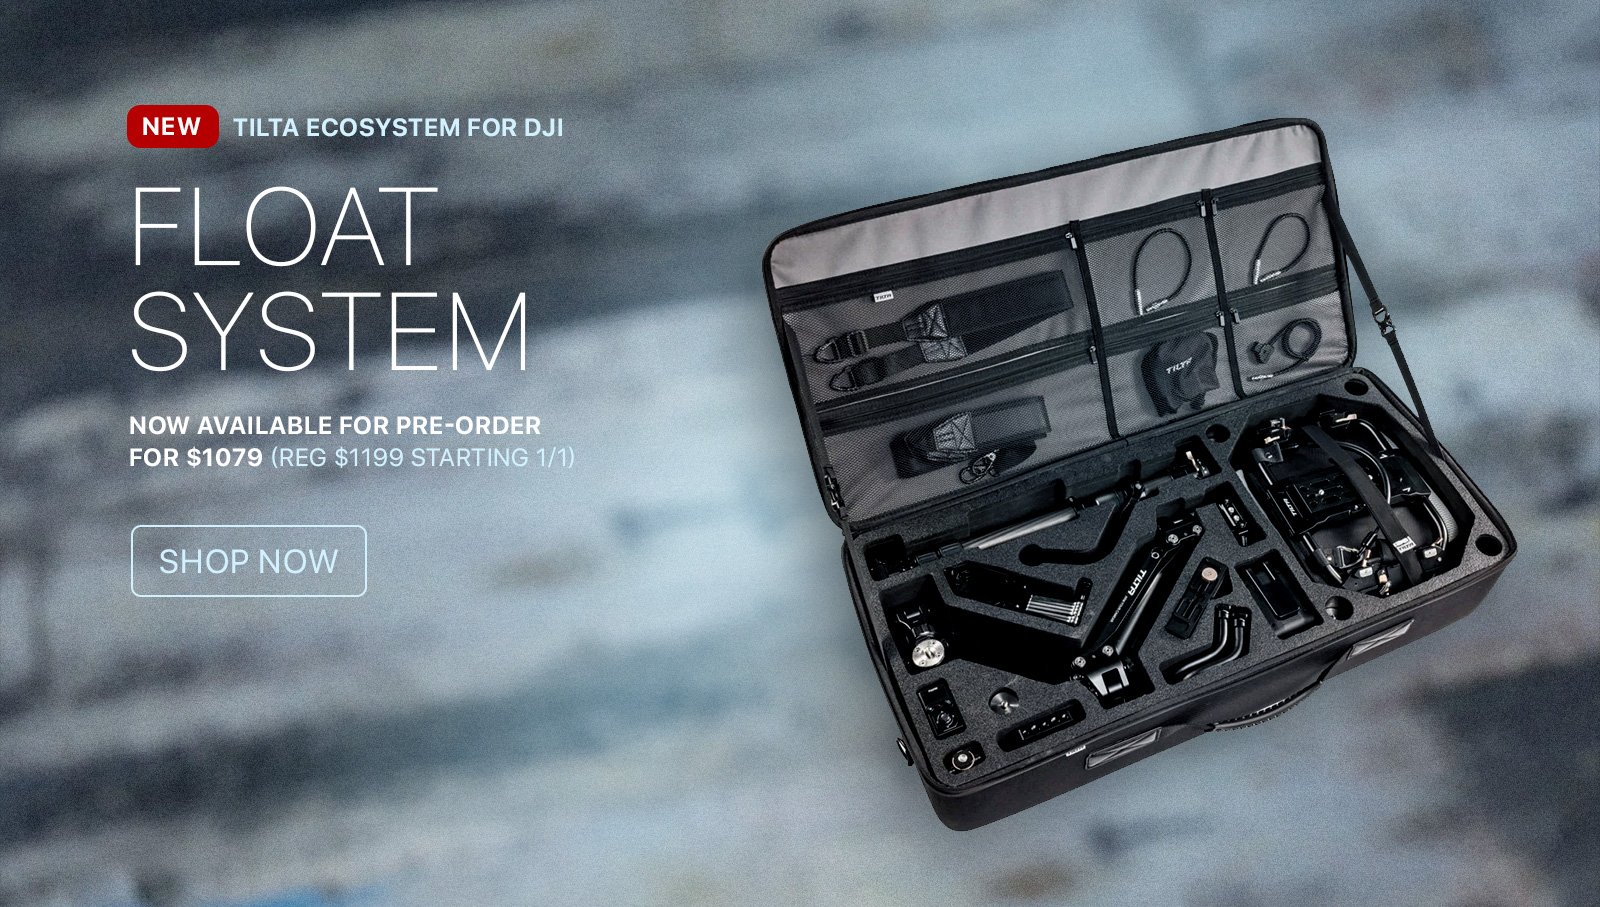 float system now available for ordering